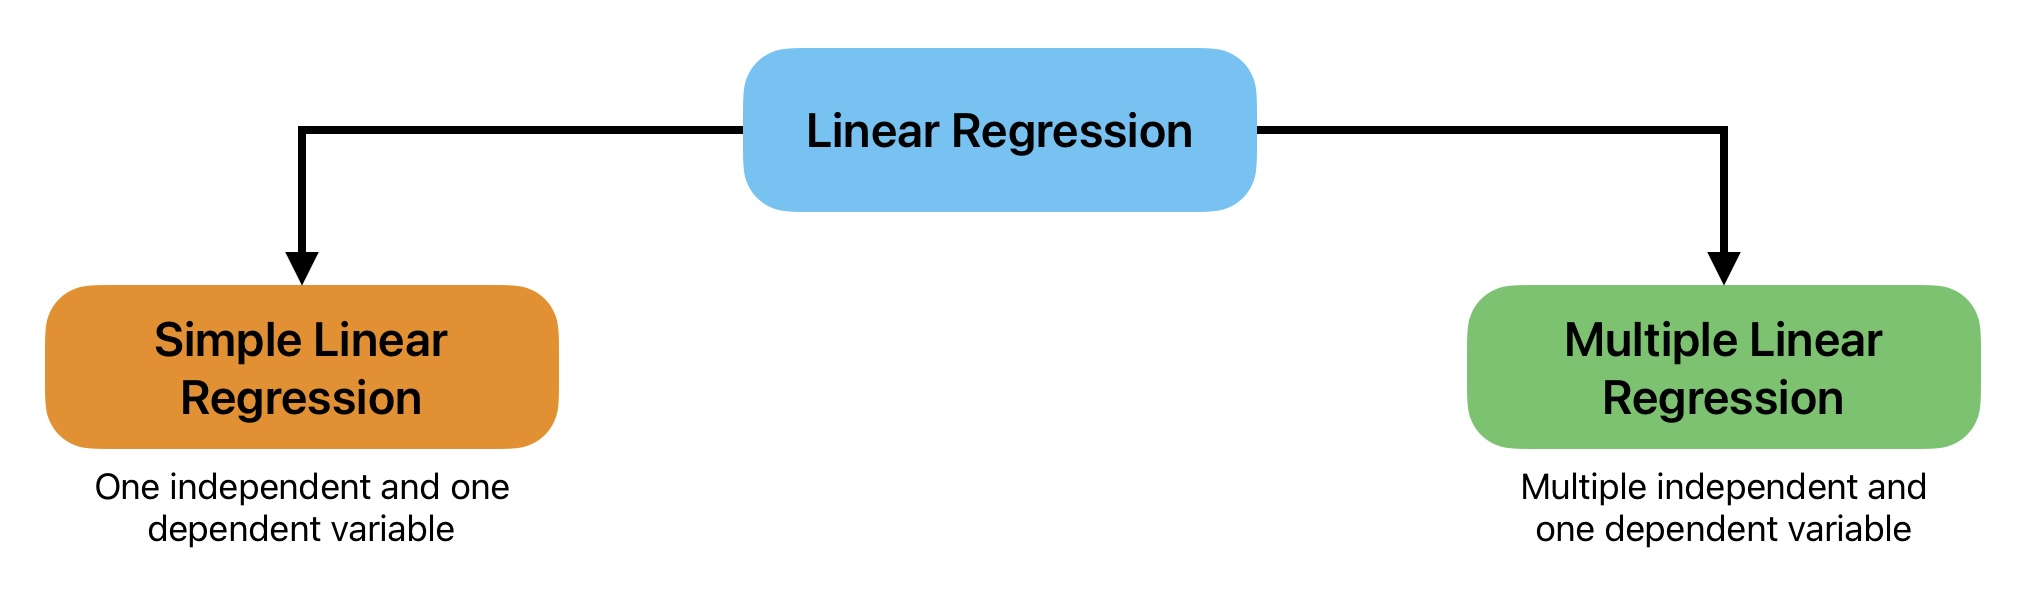 This image shows types of Type of Linear Regression algorithms